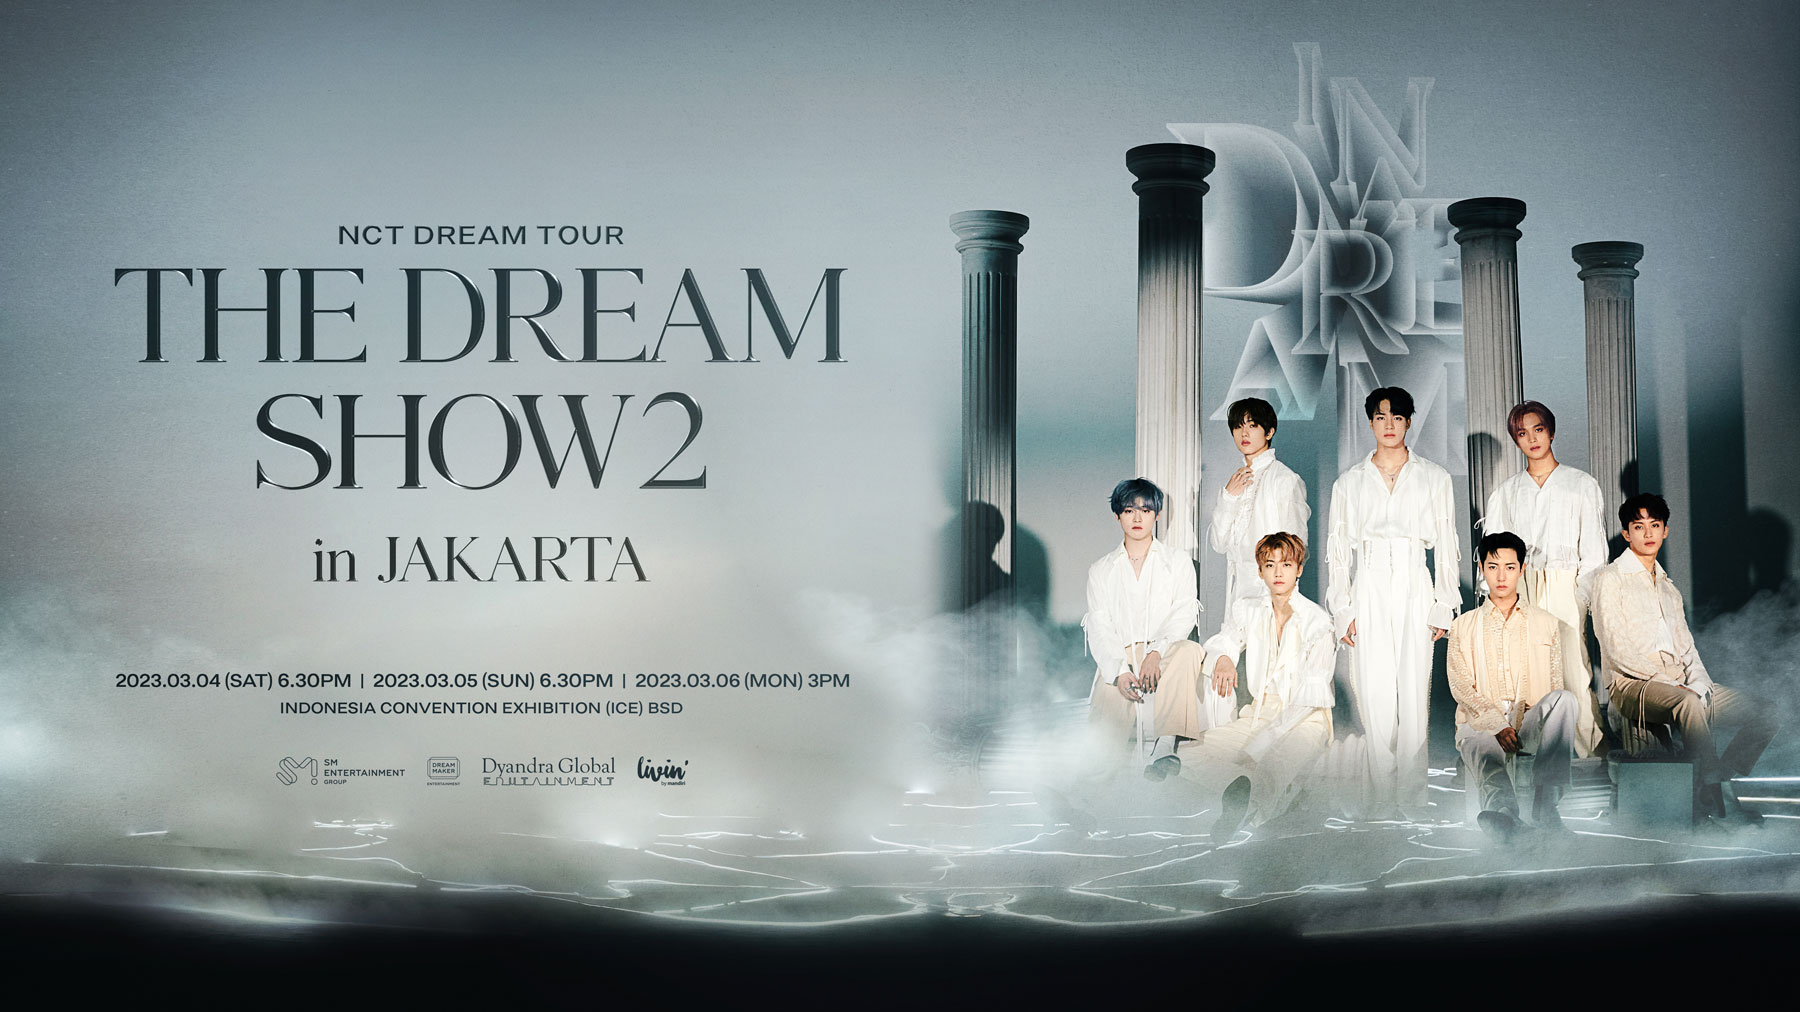 NCT DREAM TOUR – THE DREAM SHOW 2 in Jakarta